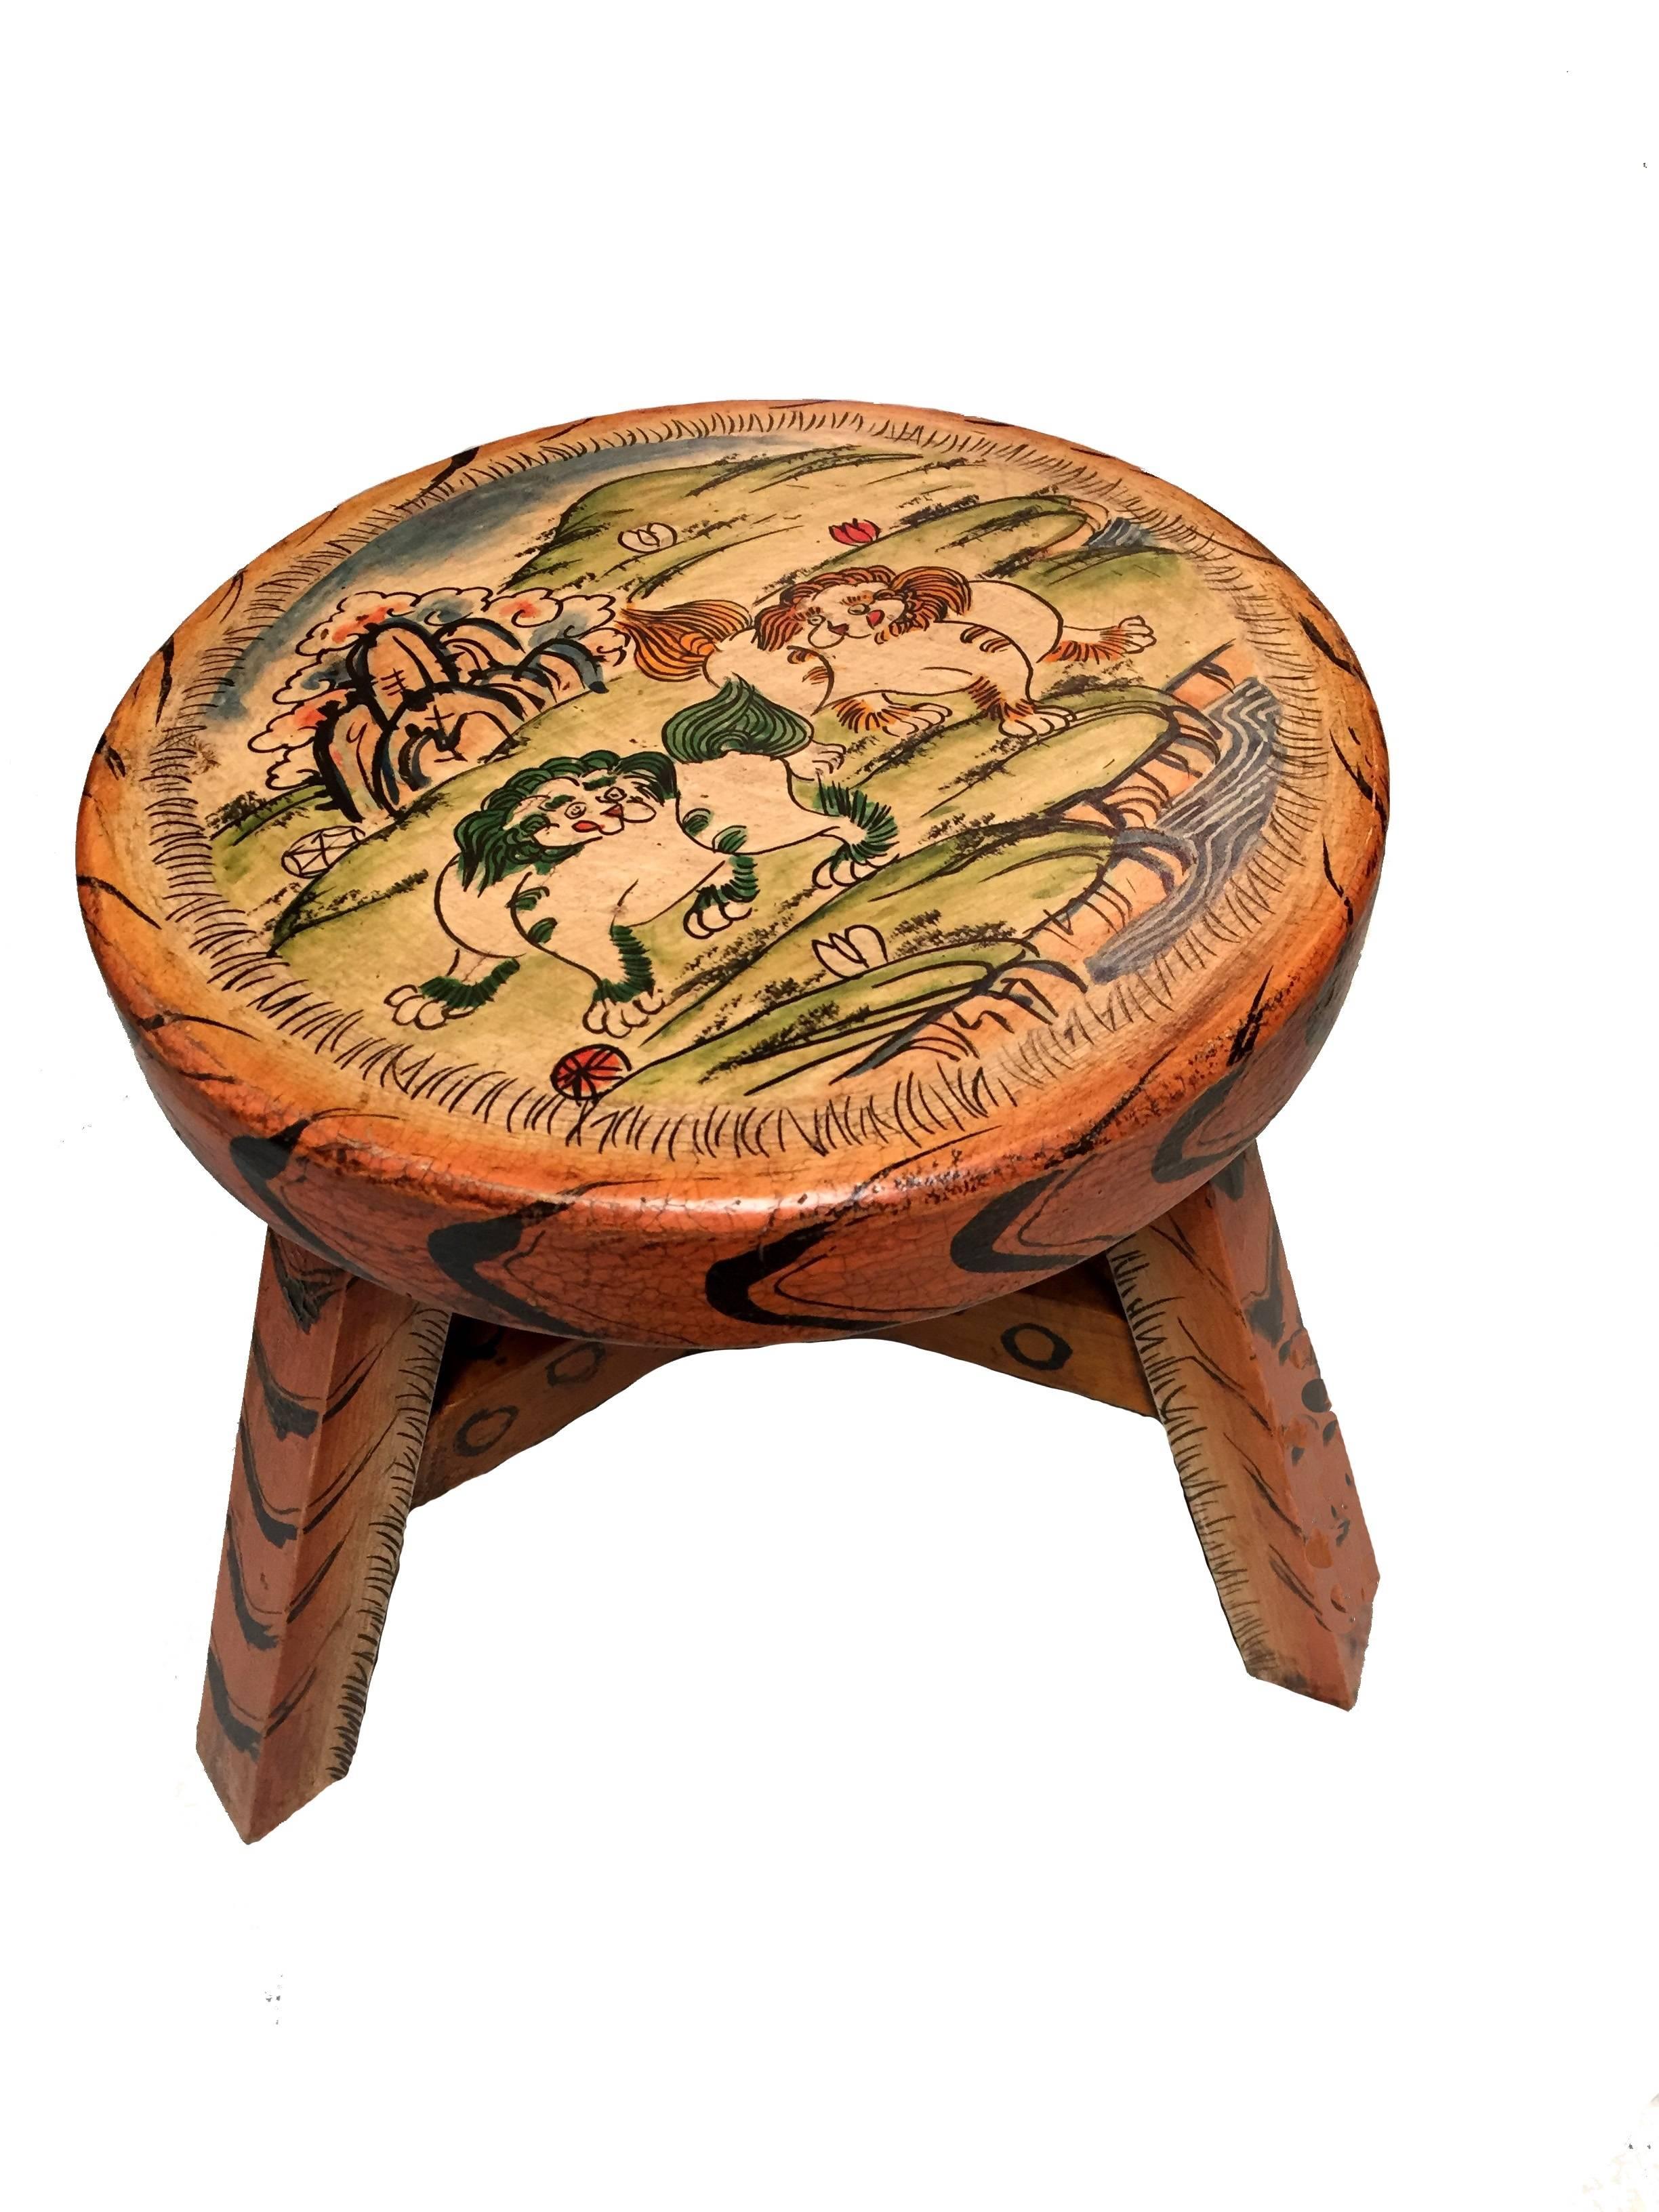 Beautiful hand-painted stools feature deer and foo dogs. Deer symbolizes peace and harmony. Foo Dogs are guardians for safety and security. Each stool is very well-made, is strong and sturdy.

Solid wood.